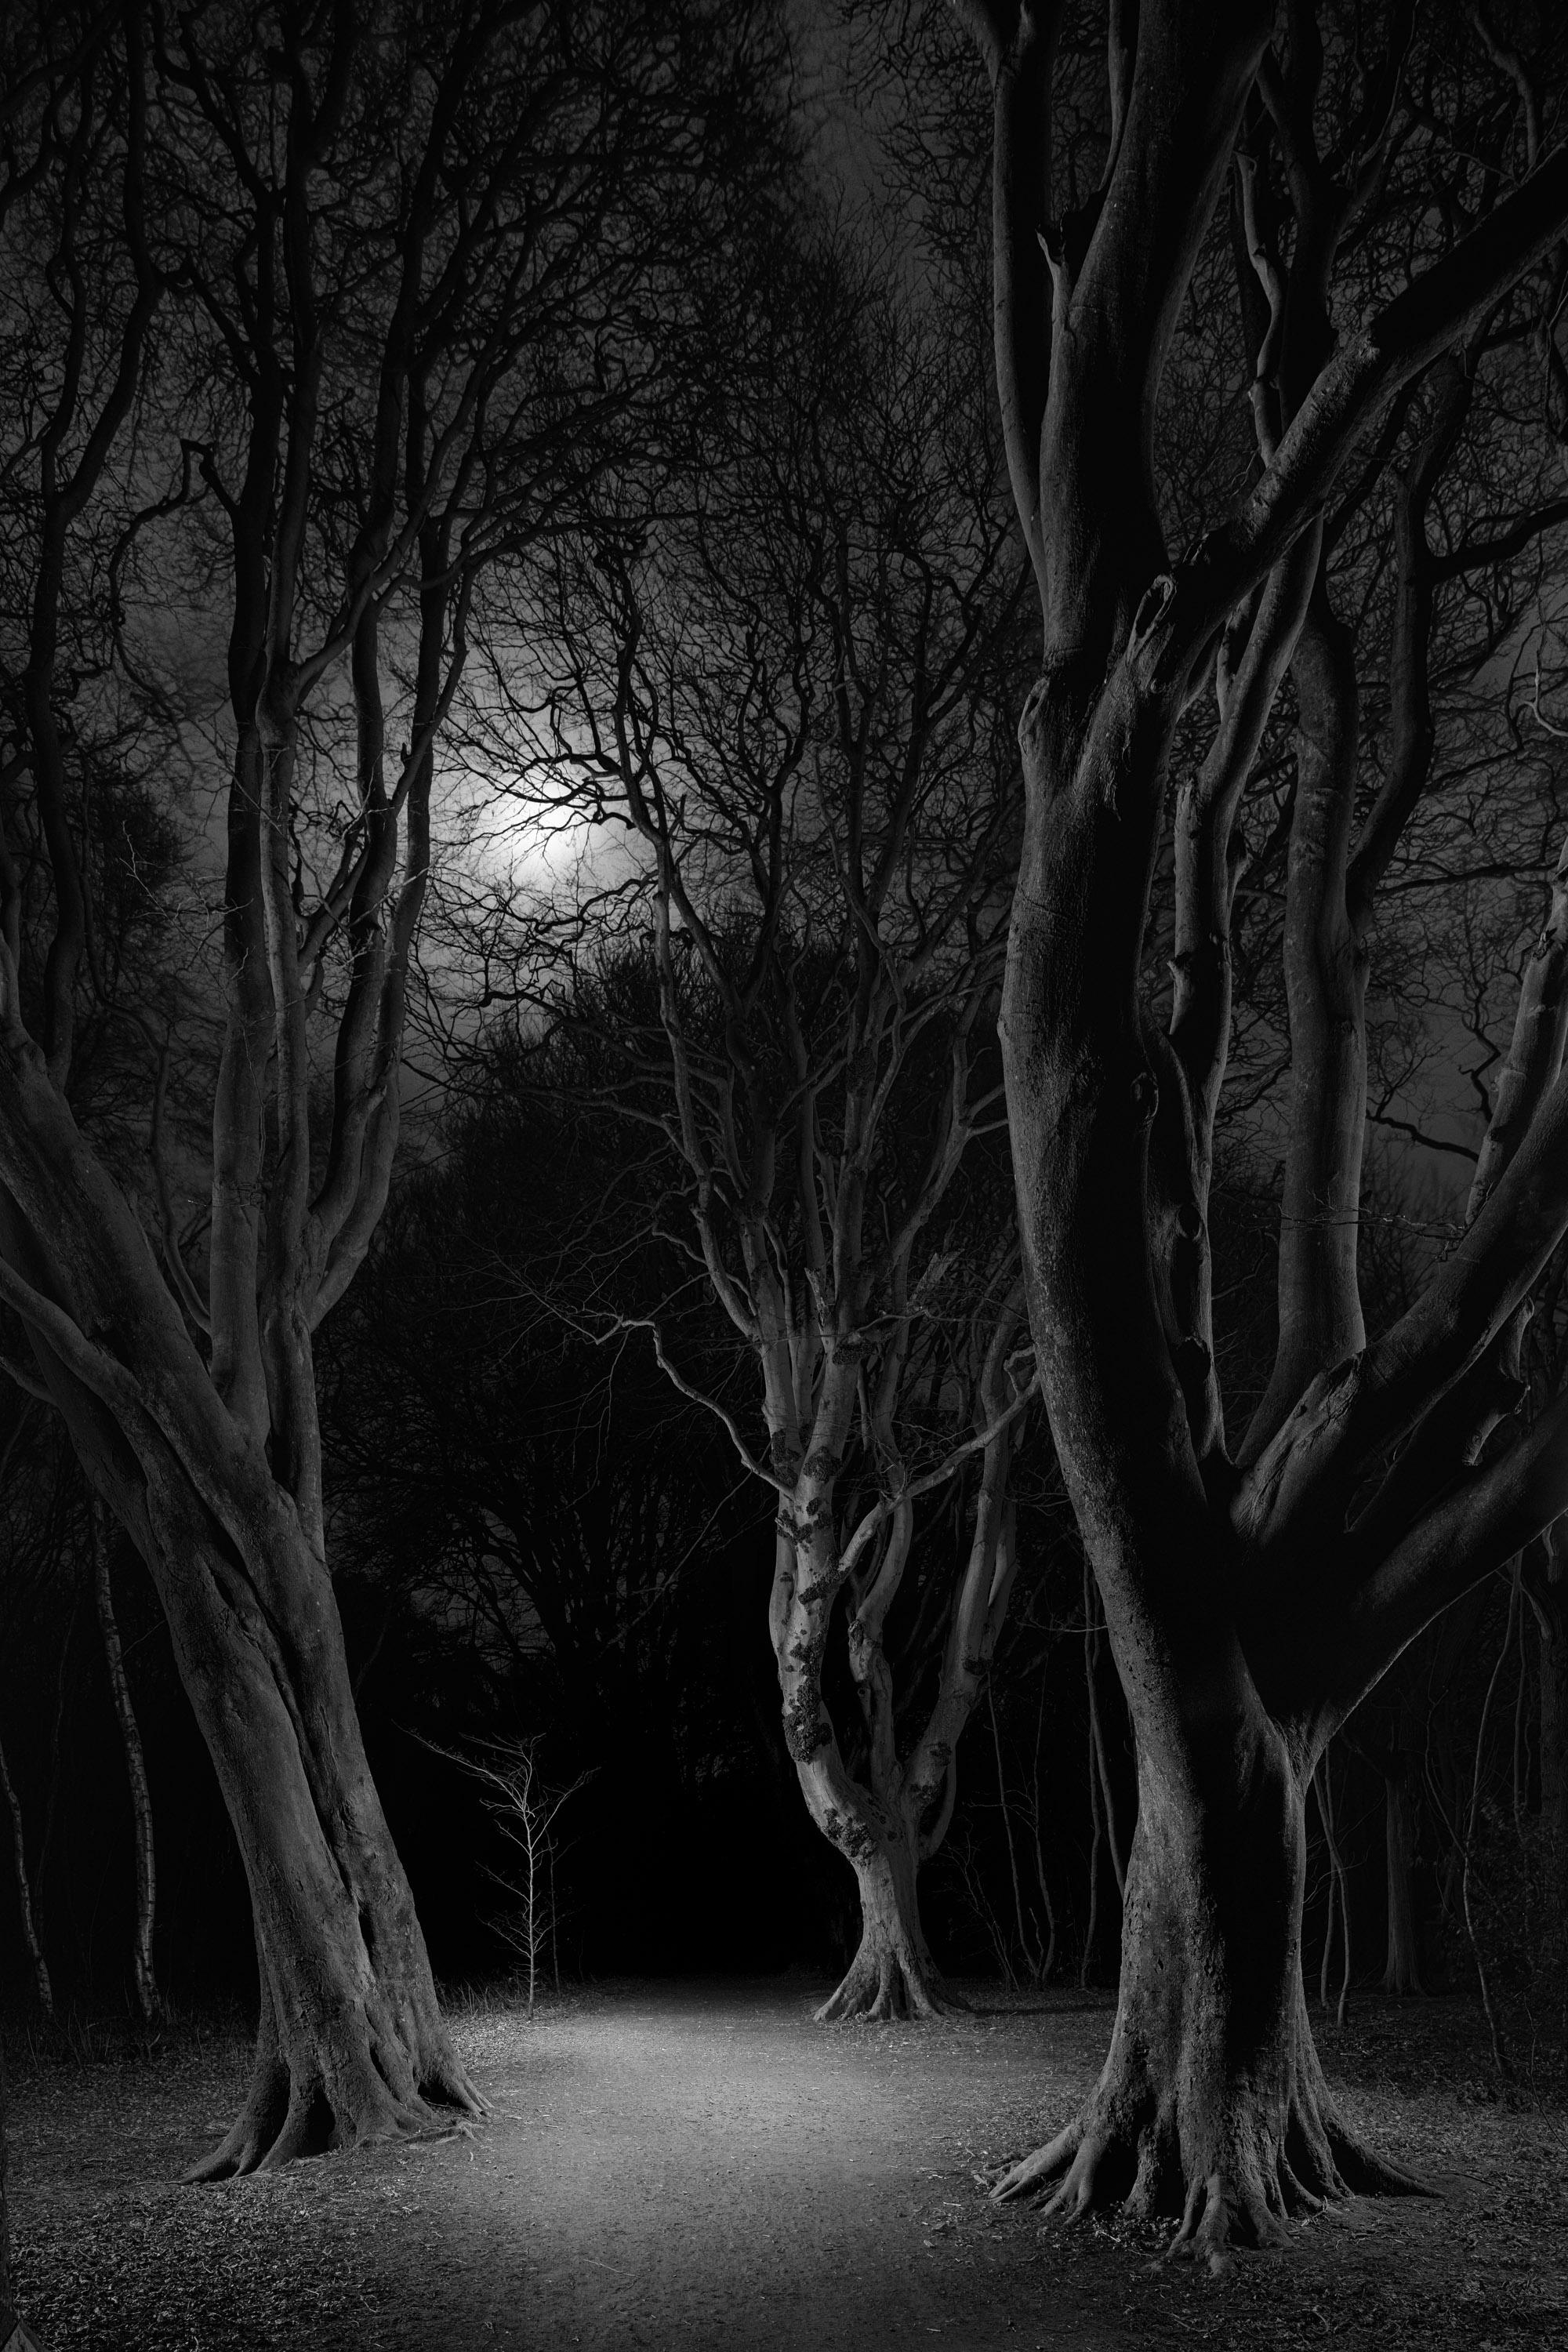 Black and white Moonlight behind the trees and path in the forest at night